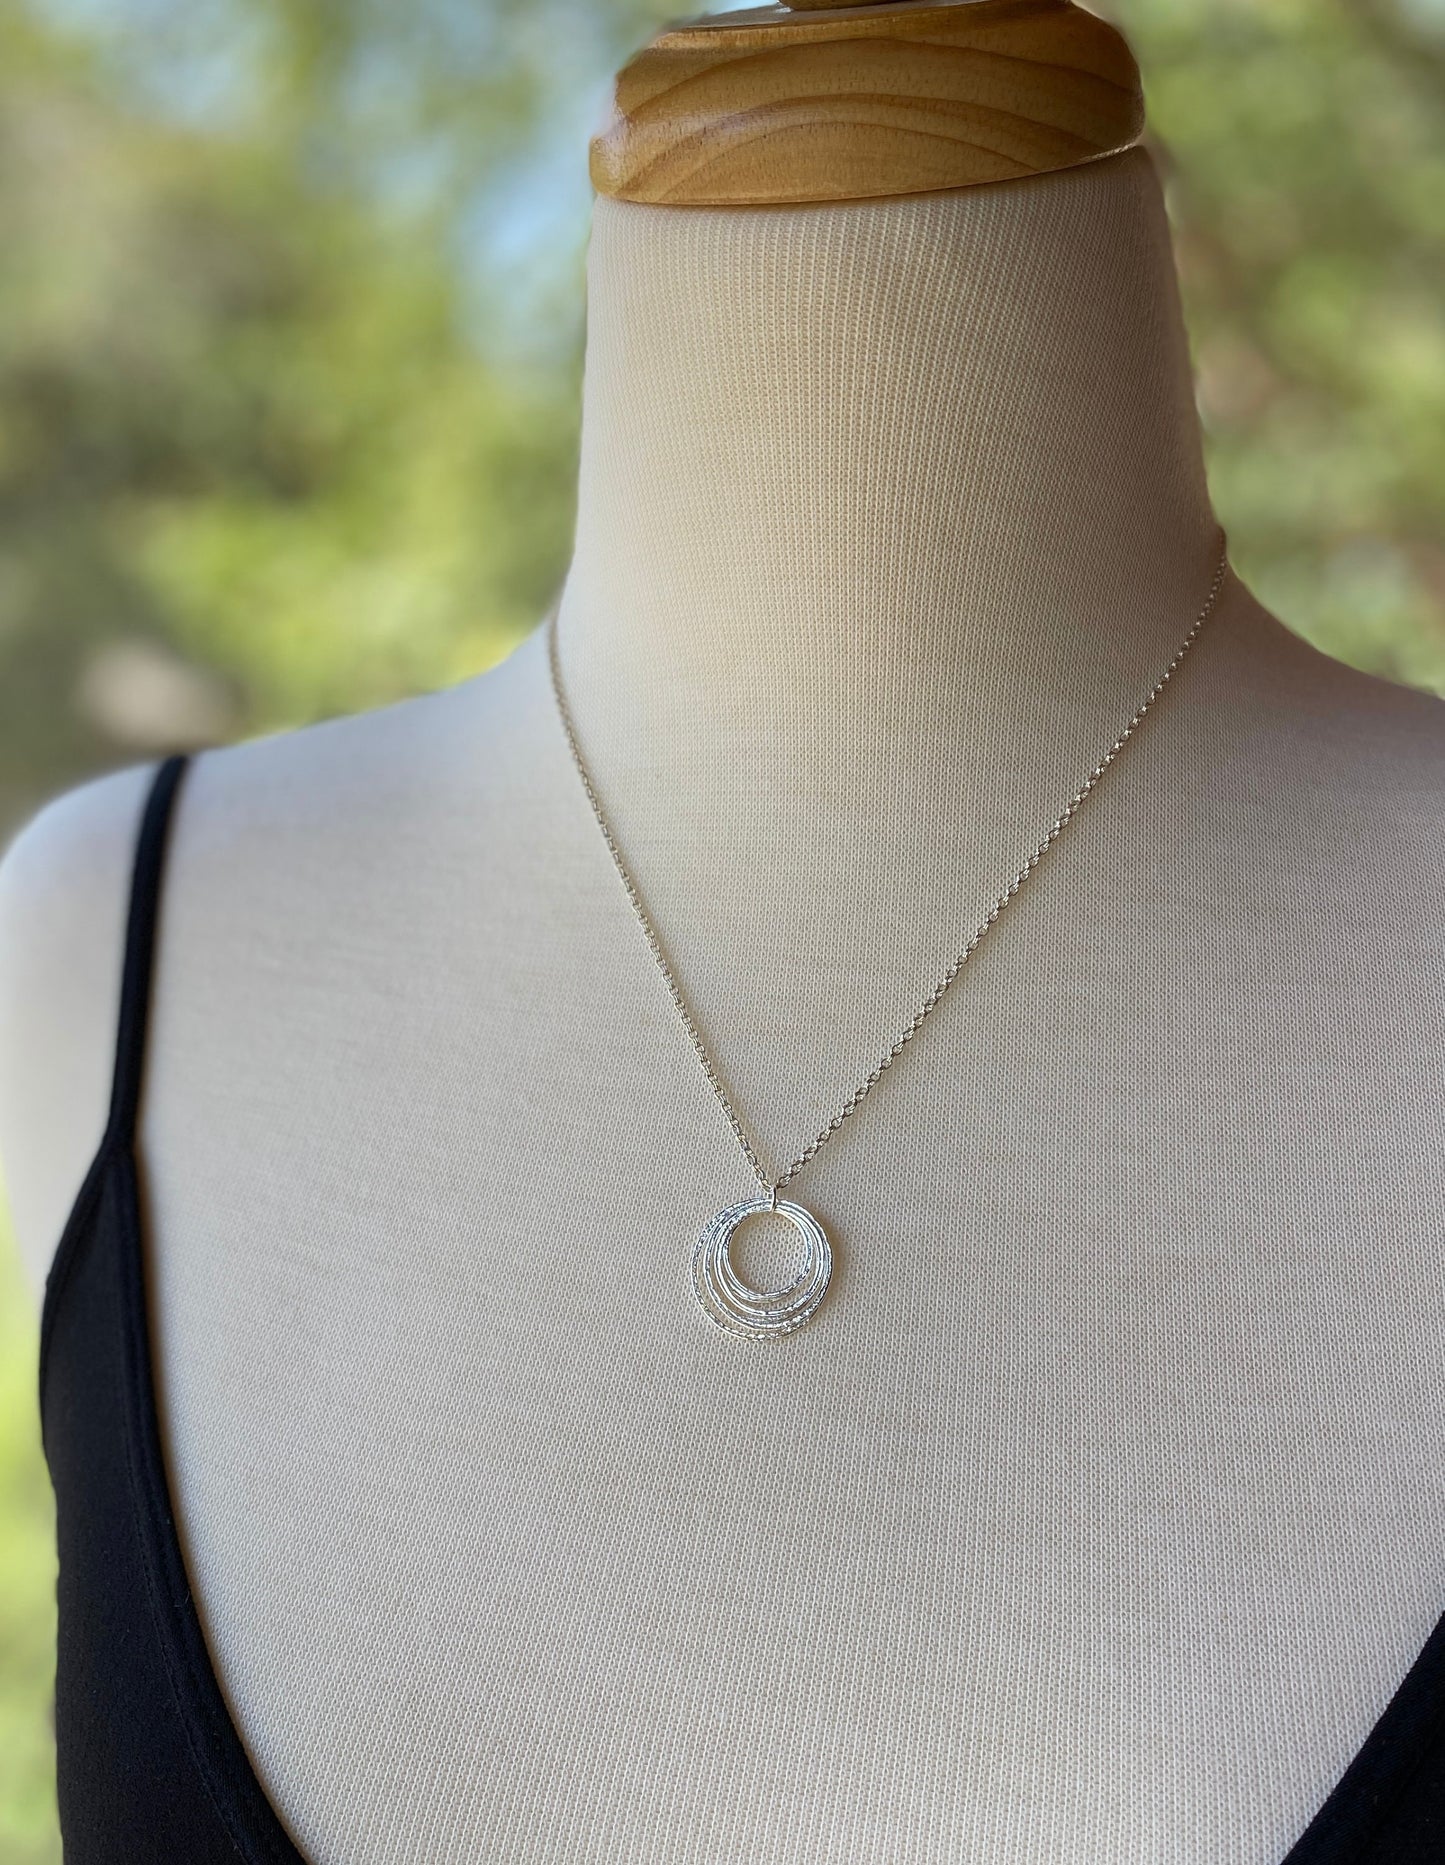 Six Circle 60th Minimalist Milestone Birthday Necklace, Sterling Silver 6 Rings for 6 Decades Handcrafted Perfectly Imperfect Circle Pendant